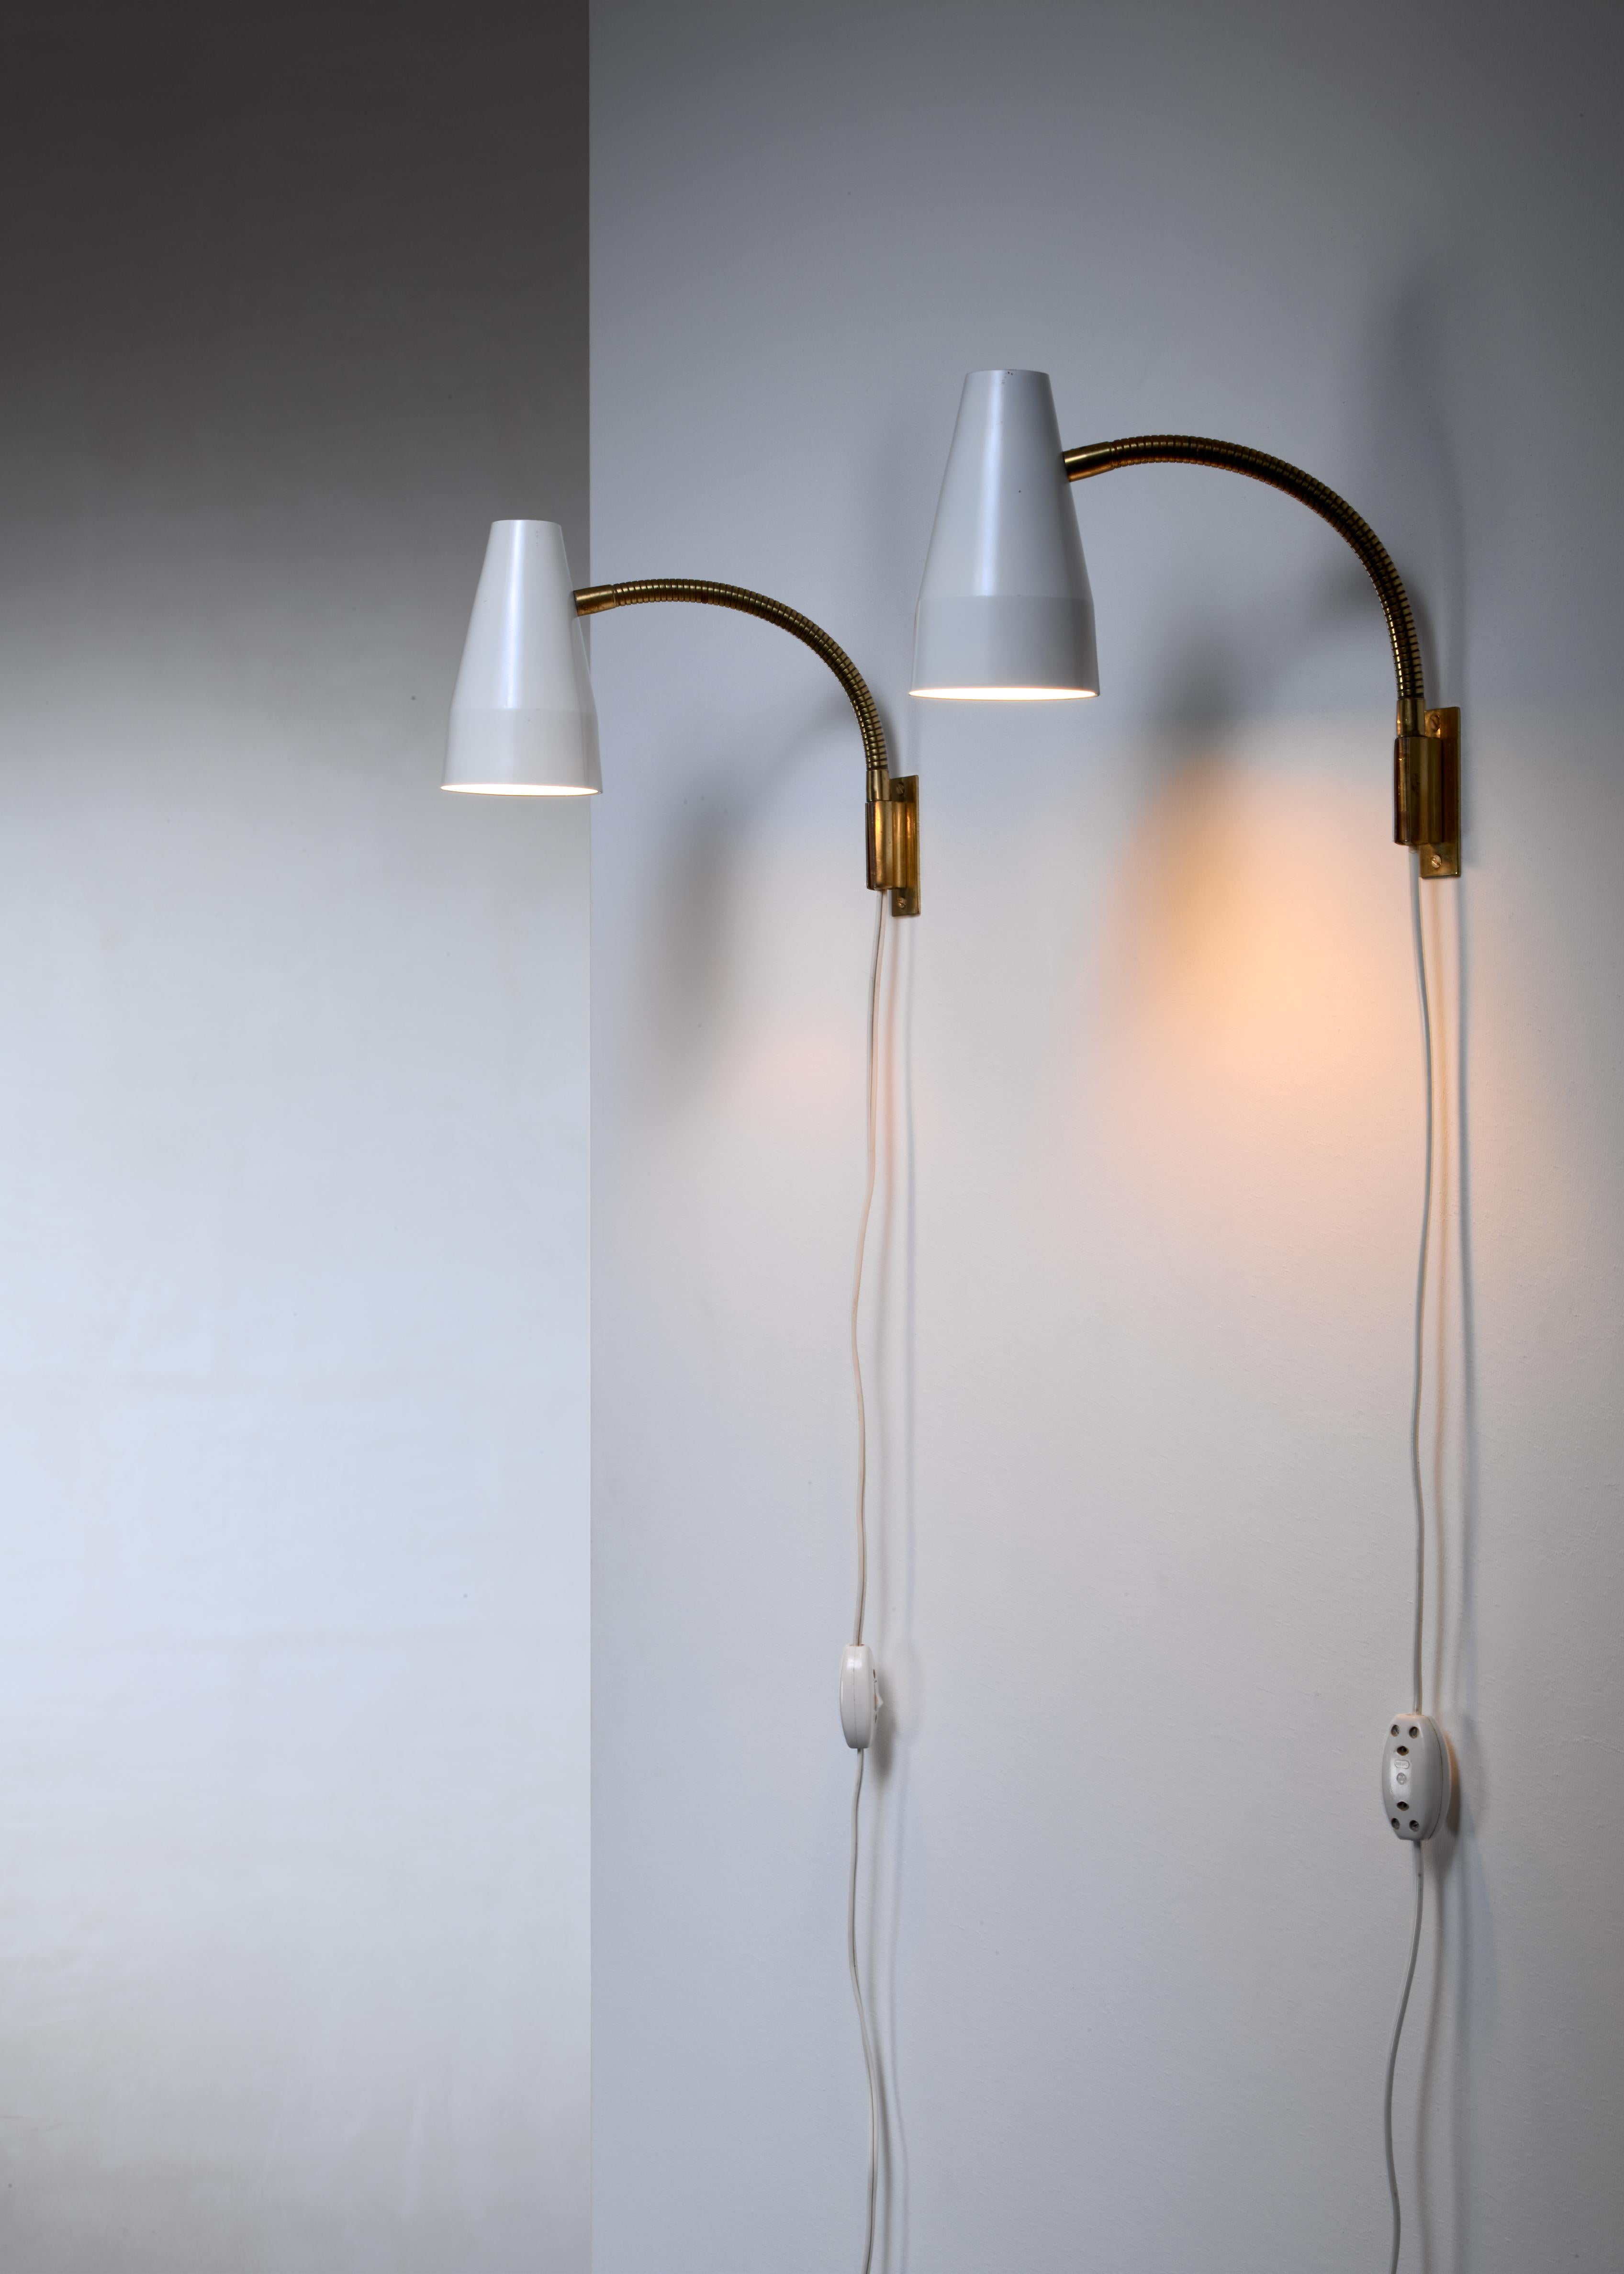 A pair of 1950s wall lamps by Lisa Johansson-Pape for Orno. The lamps have a flexible brass stem and a white lacquered metal hood. Marked by Orno and in a good condition.